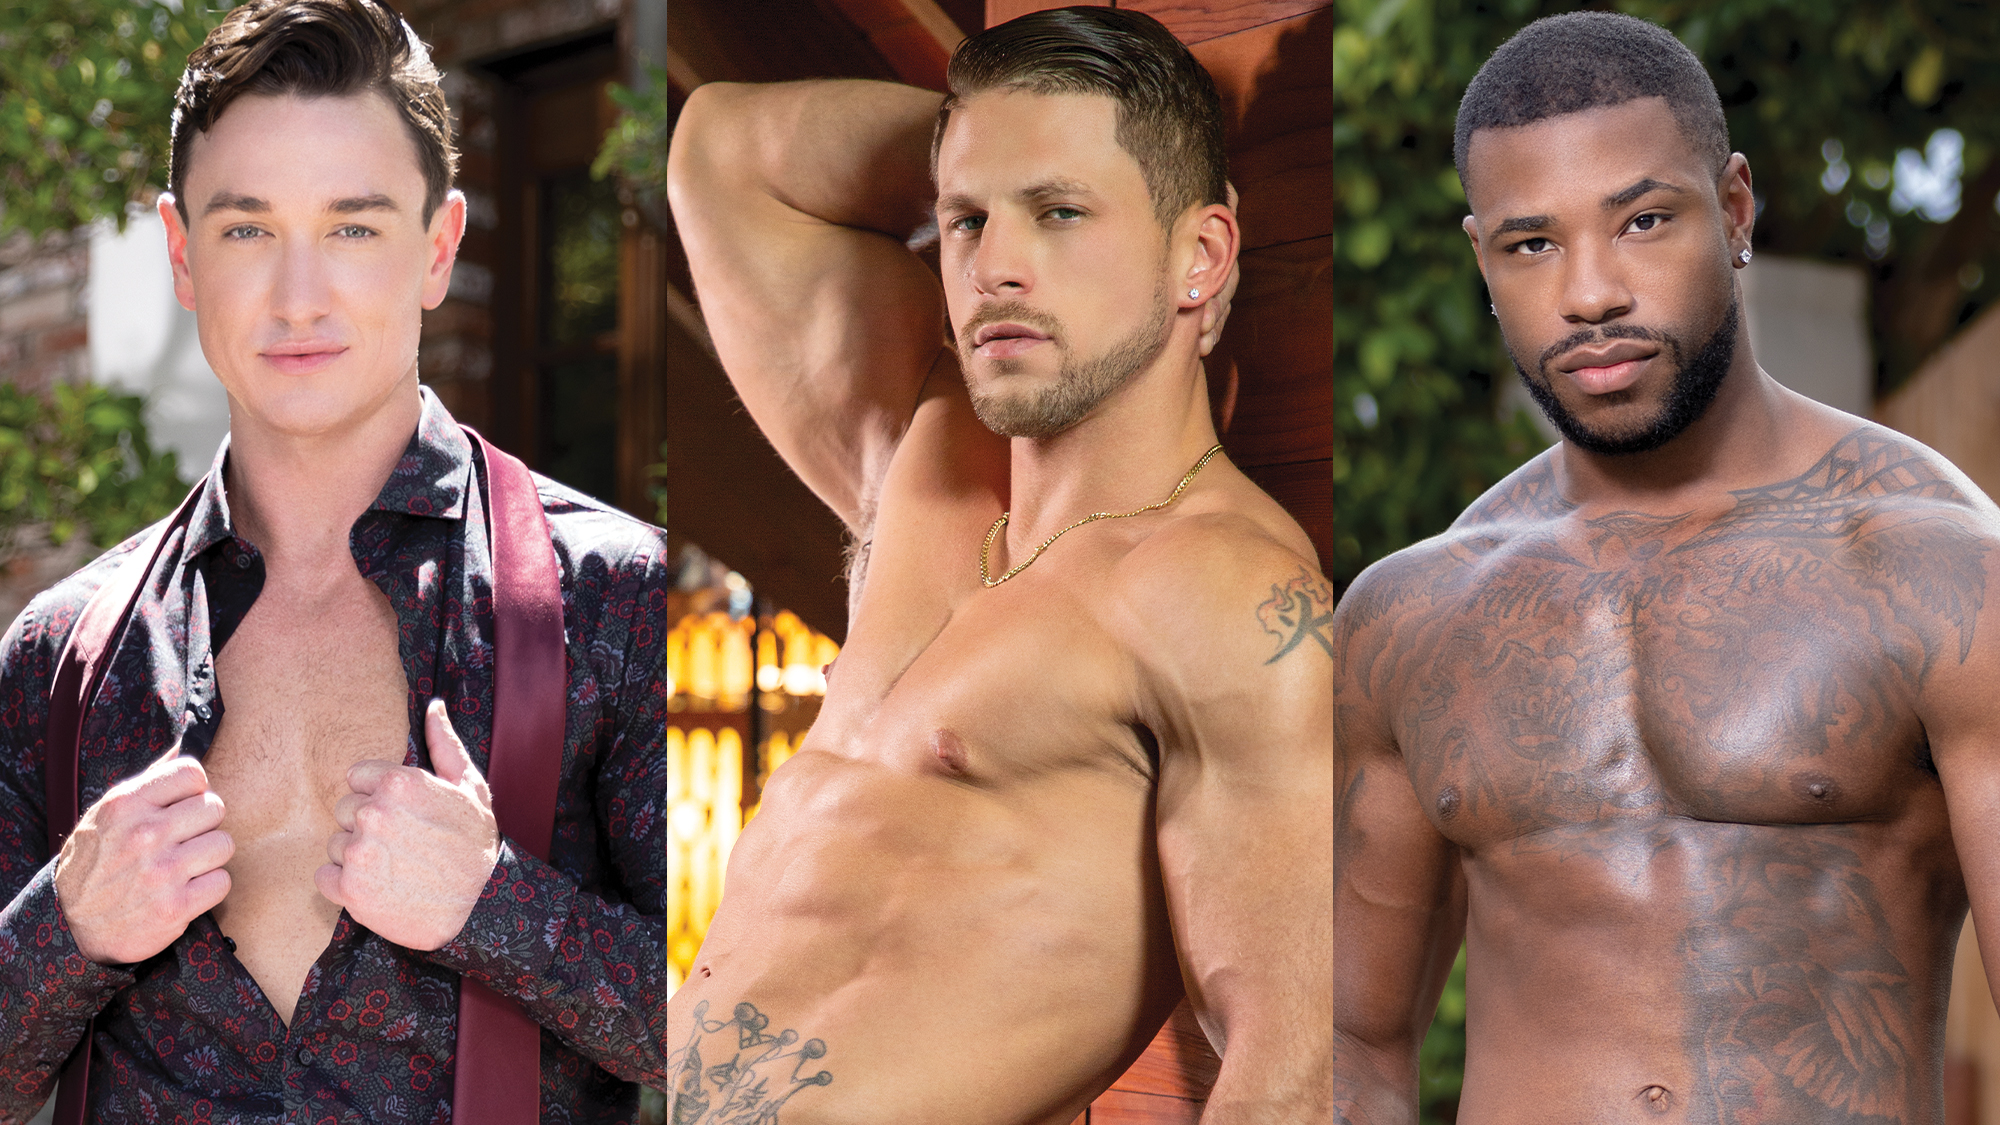 Gay Porn Models - See Which A-Lister Was Just Named The Most Popular Gay Porn Star of 2022 -  TheSword.com